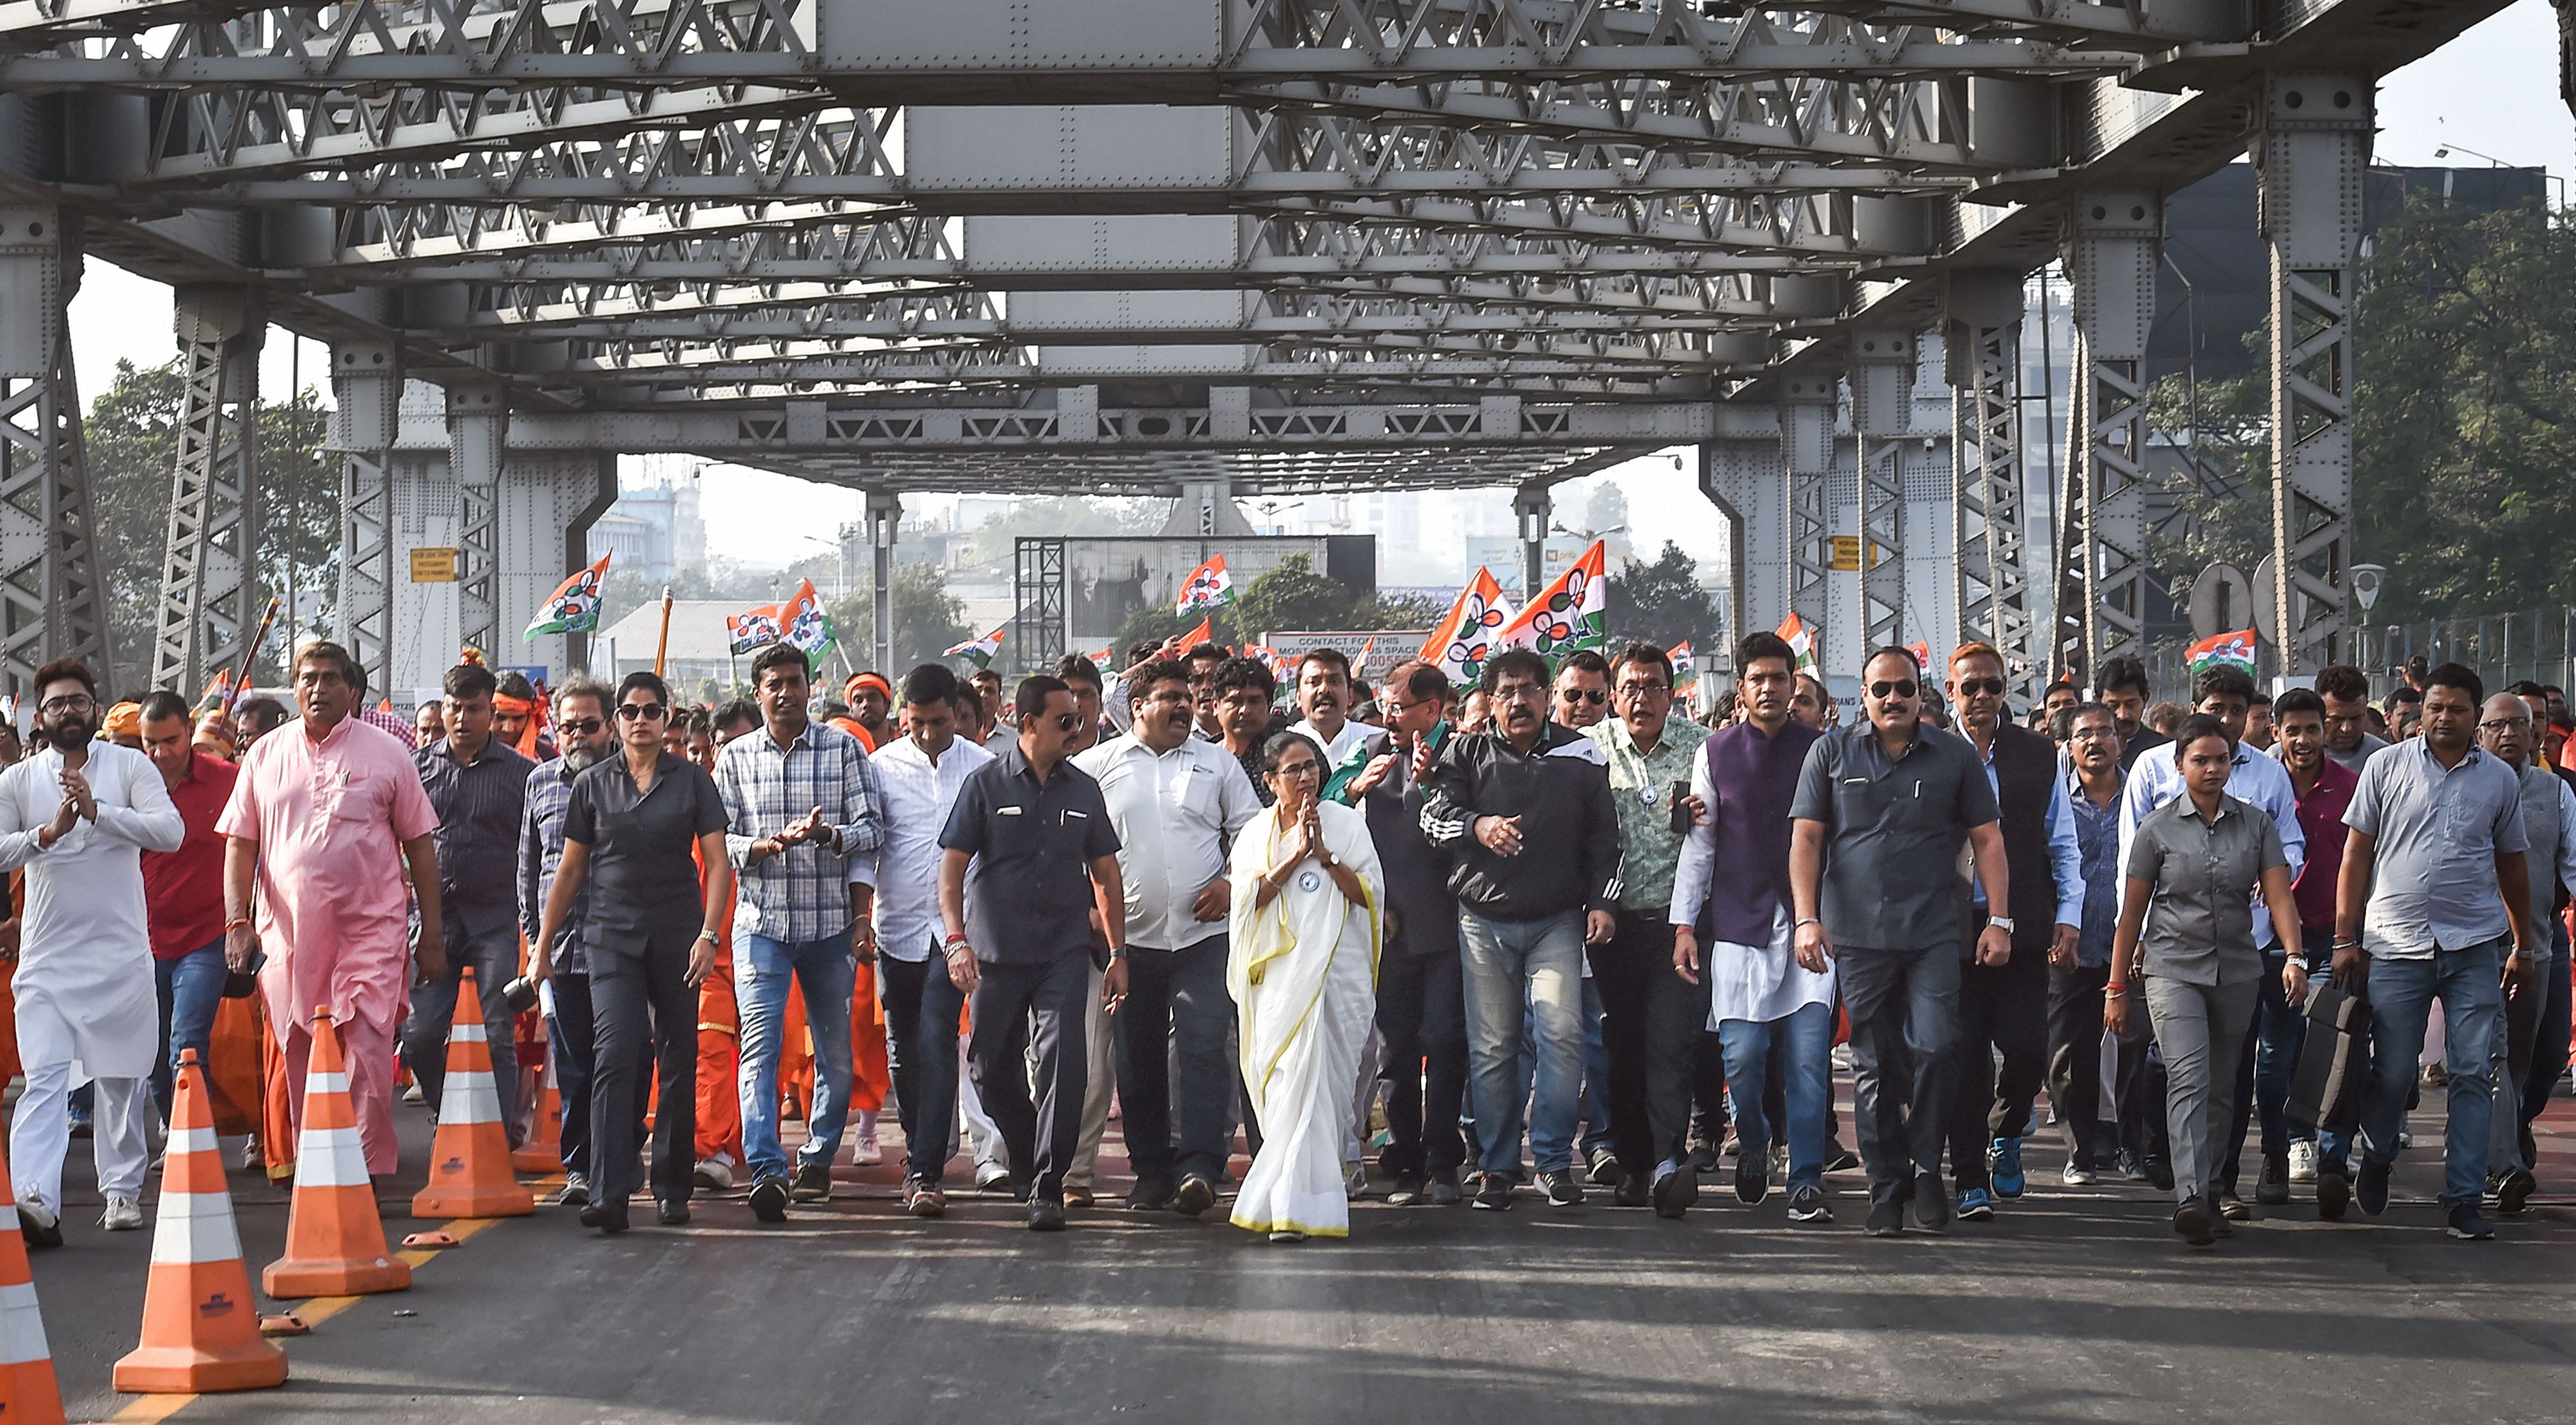 West Bengal Chief Minister and TMC chief Mamata Banerjee leads a protests rally of her party workers through Howrah Bridge, against the NRC and the Citizenship Amendment Act, in Kolkata, Wednesday, Dec. 18, 2019. (PTI Photo)